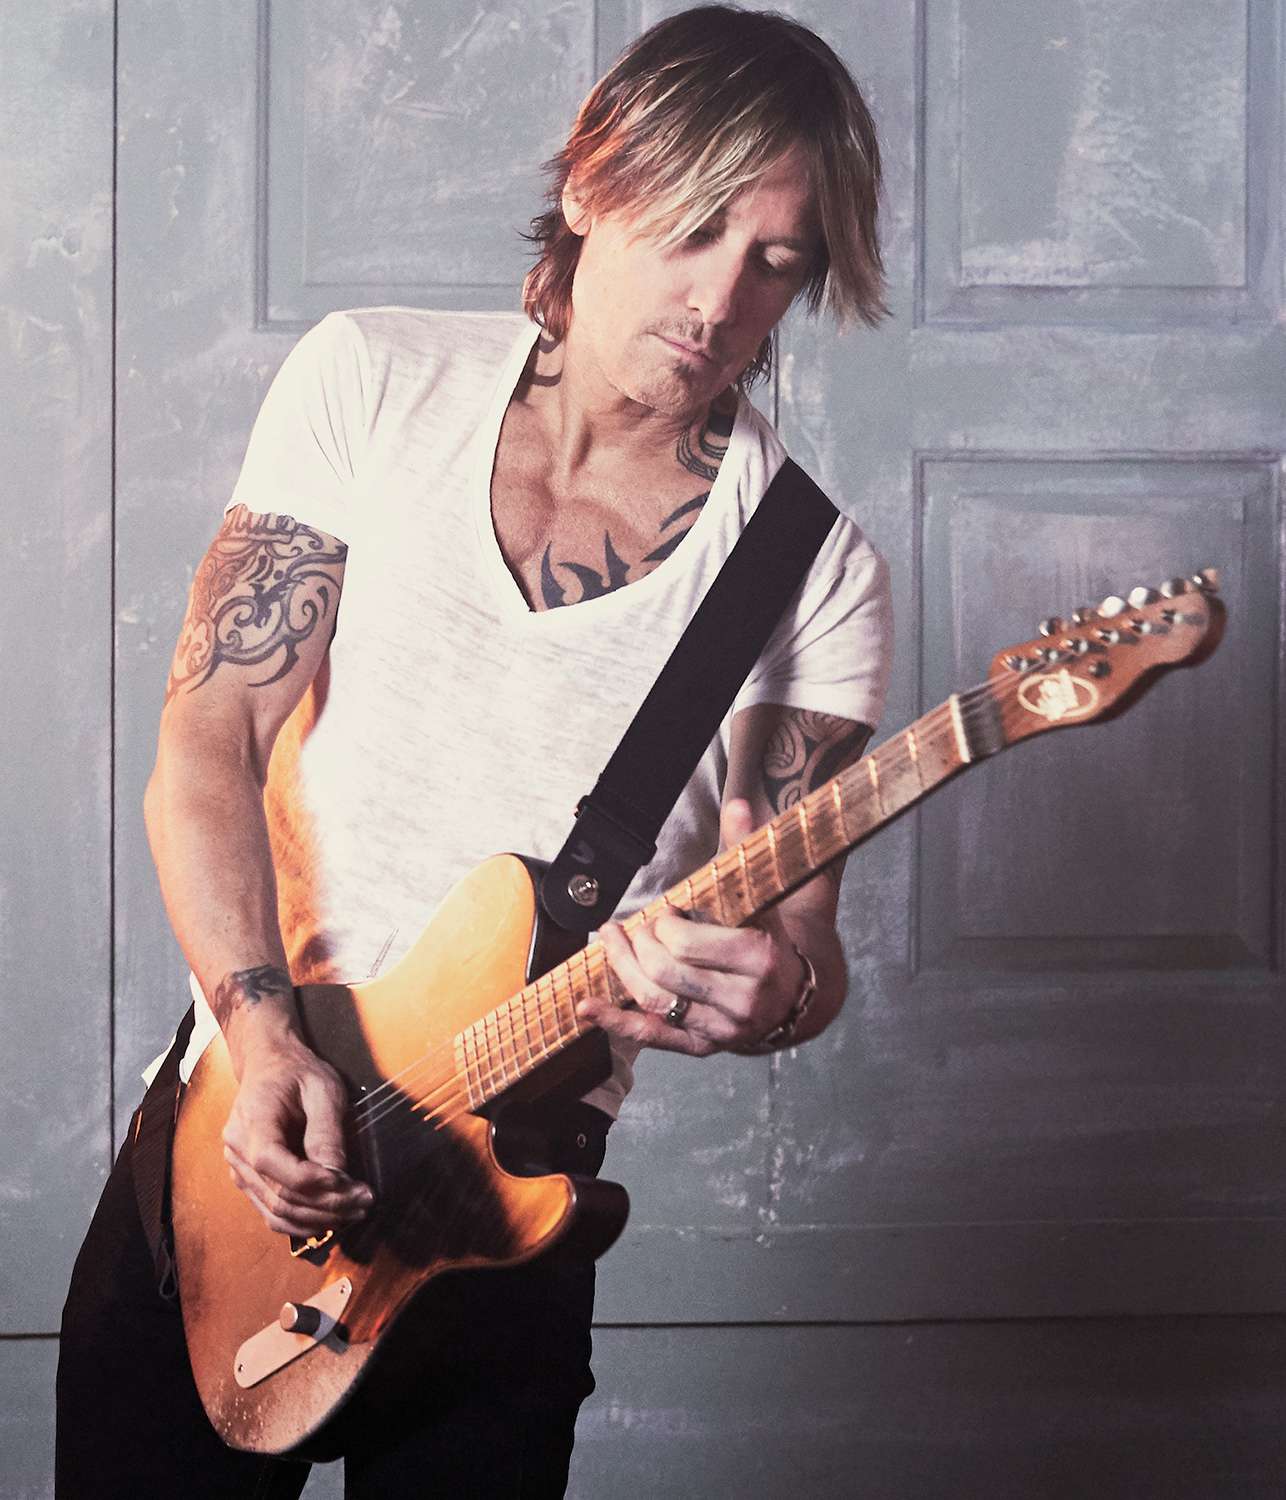 Keith Urban Concert Schedule 2022 Keith Urban Announces 50-Date North American Tour | People.com